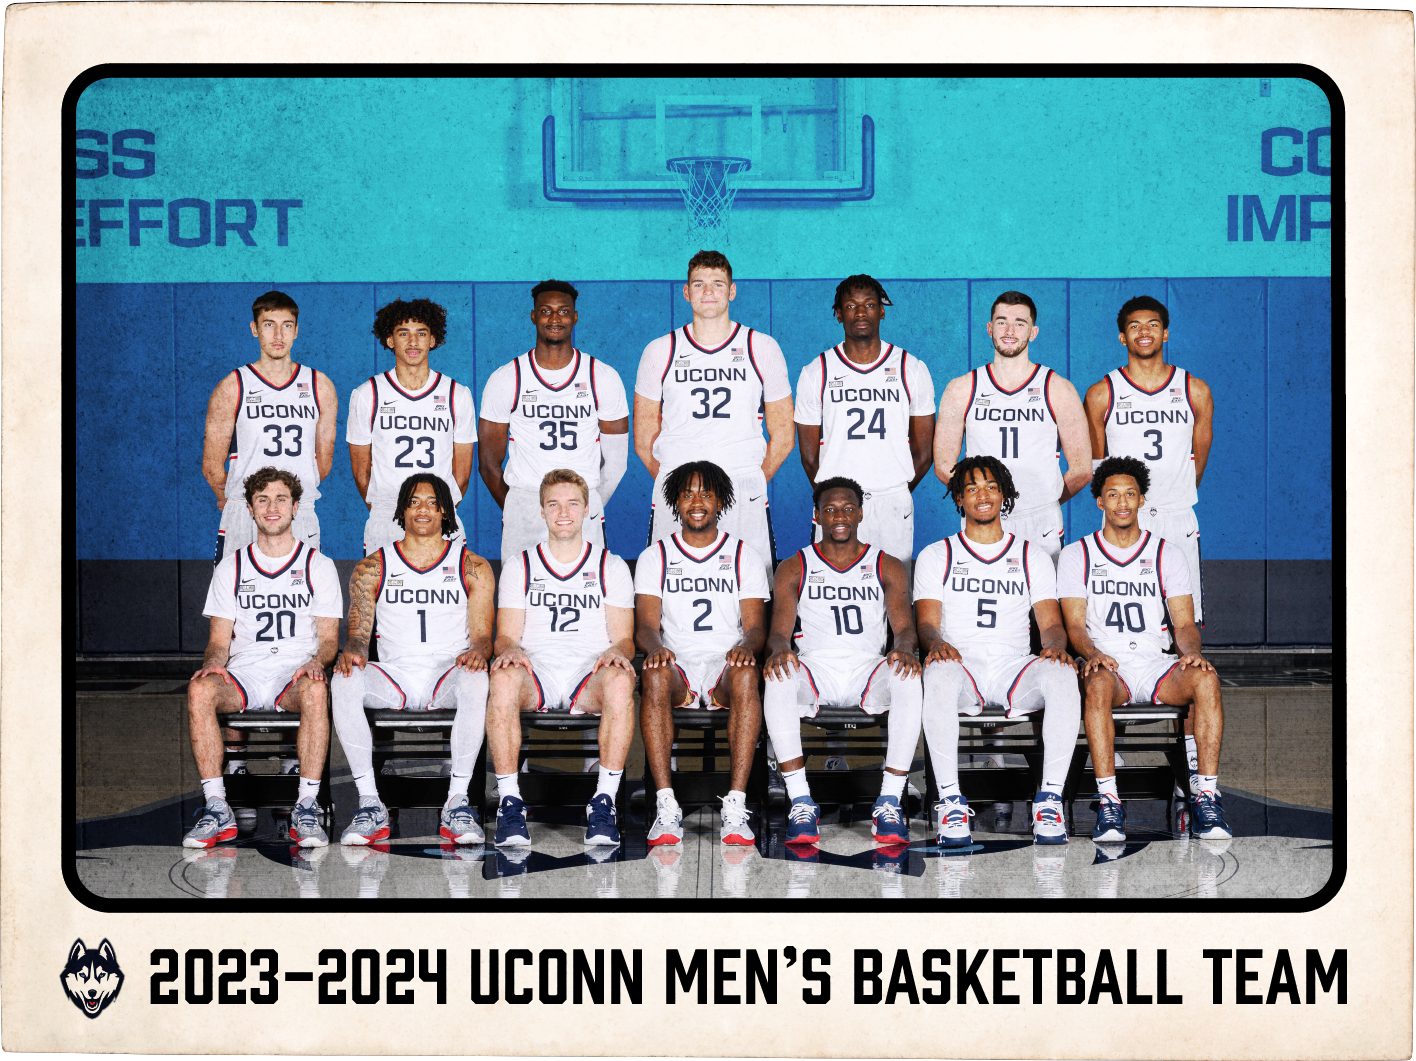 Vintage-style trading card showing a posed team picture of the 2023-2024 UConn Men’s Basketball Team in a gymnasium.